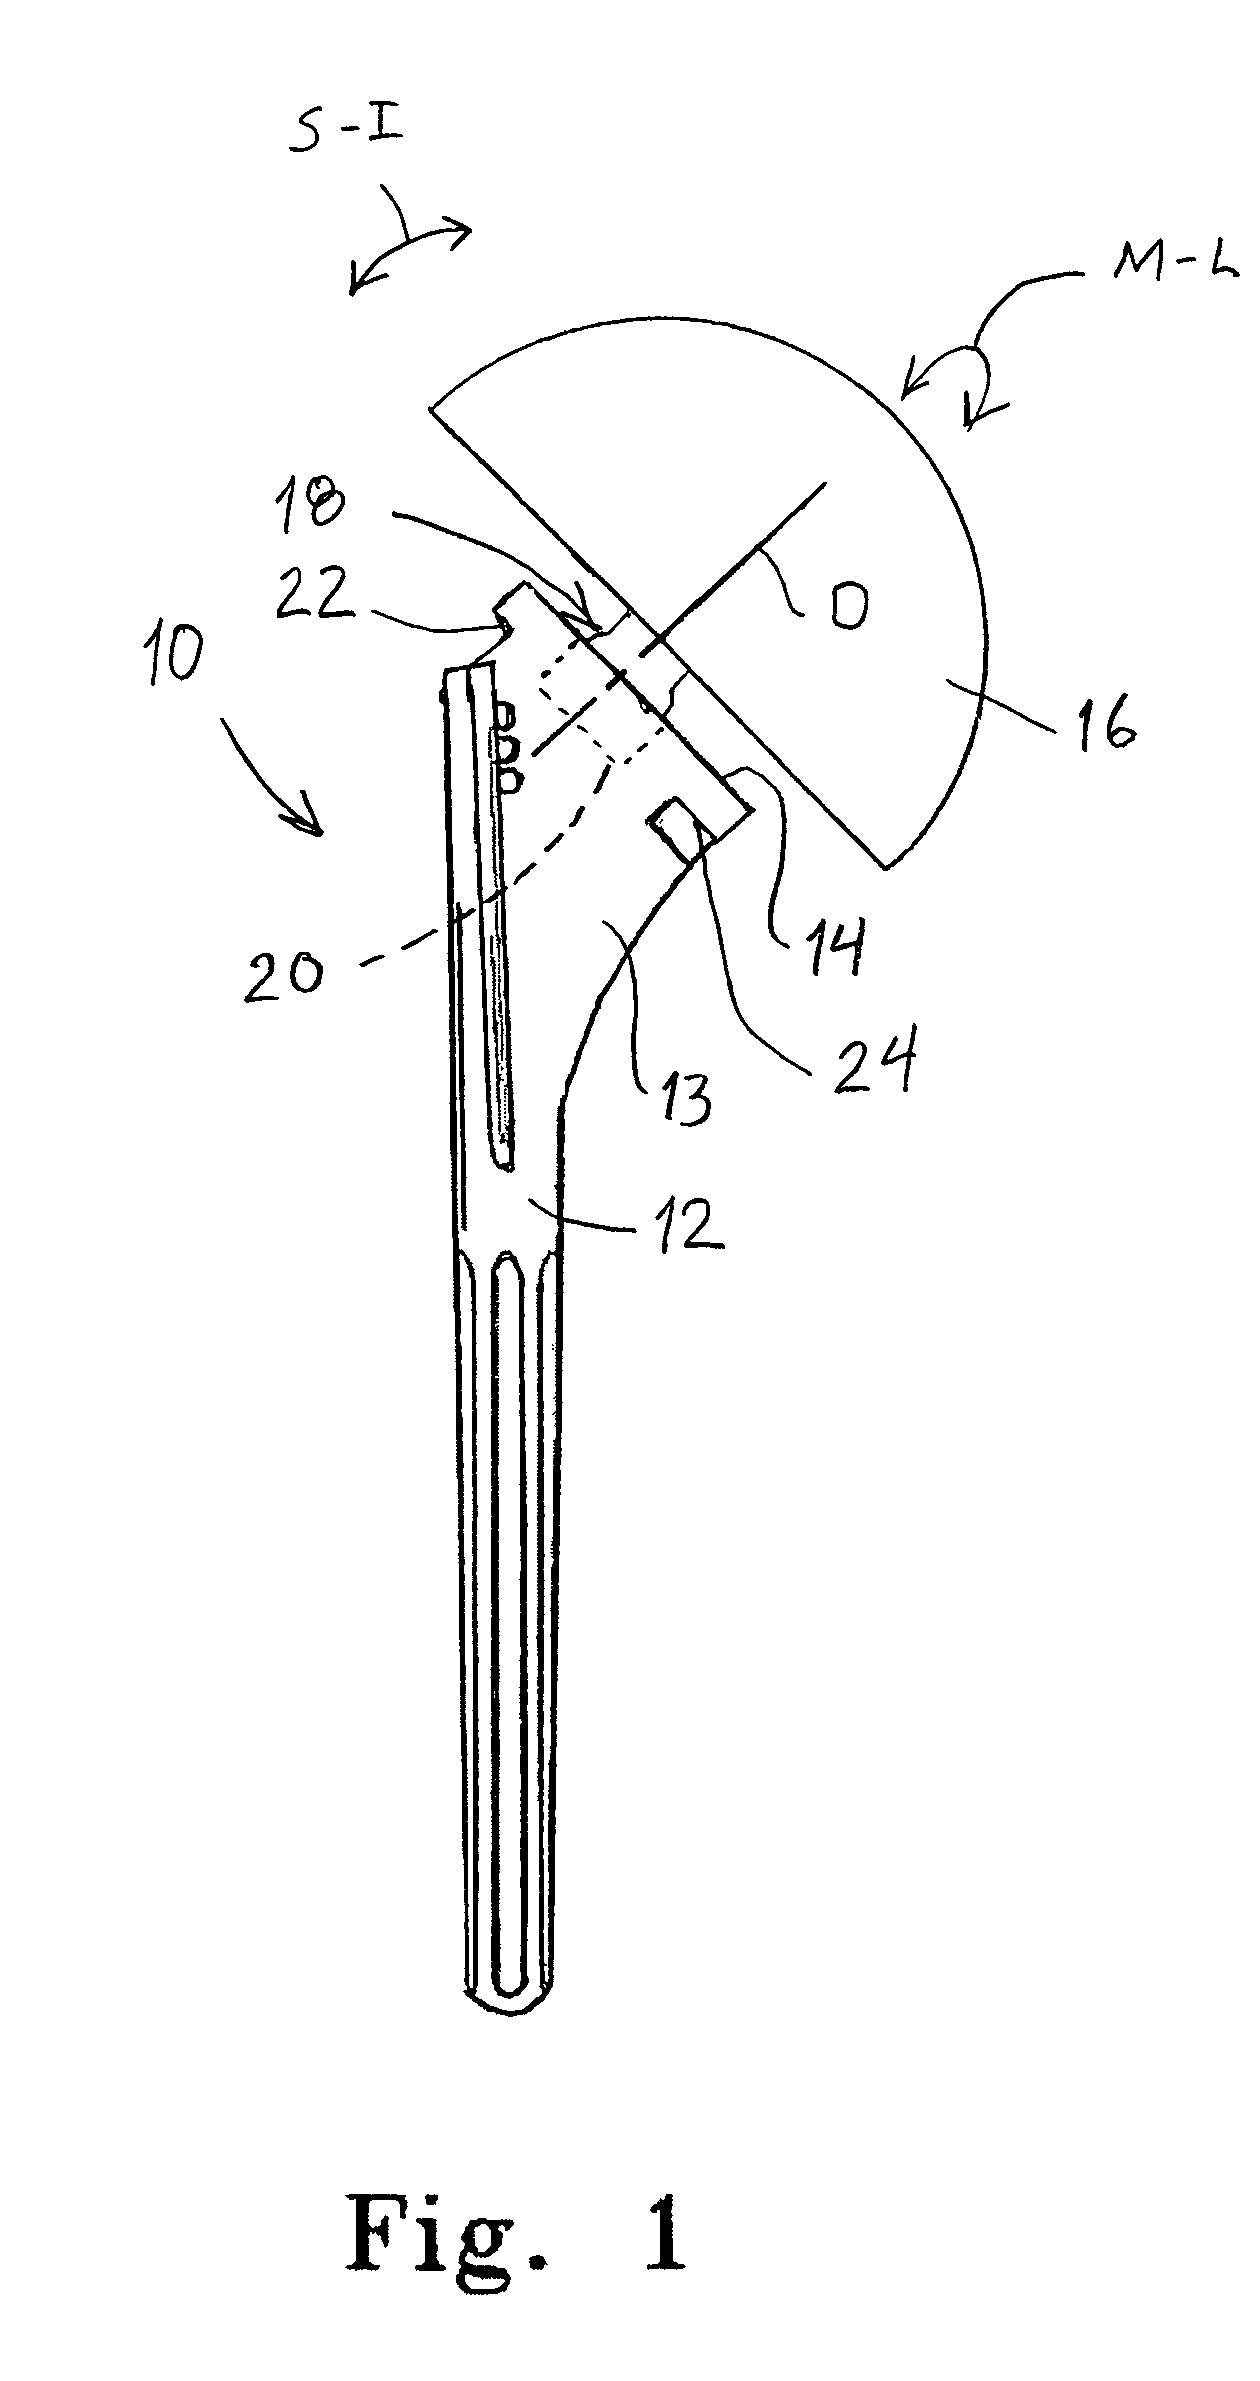 System and method for replicating orthopaedic implant orientation